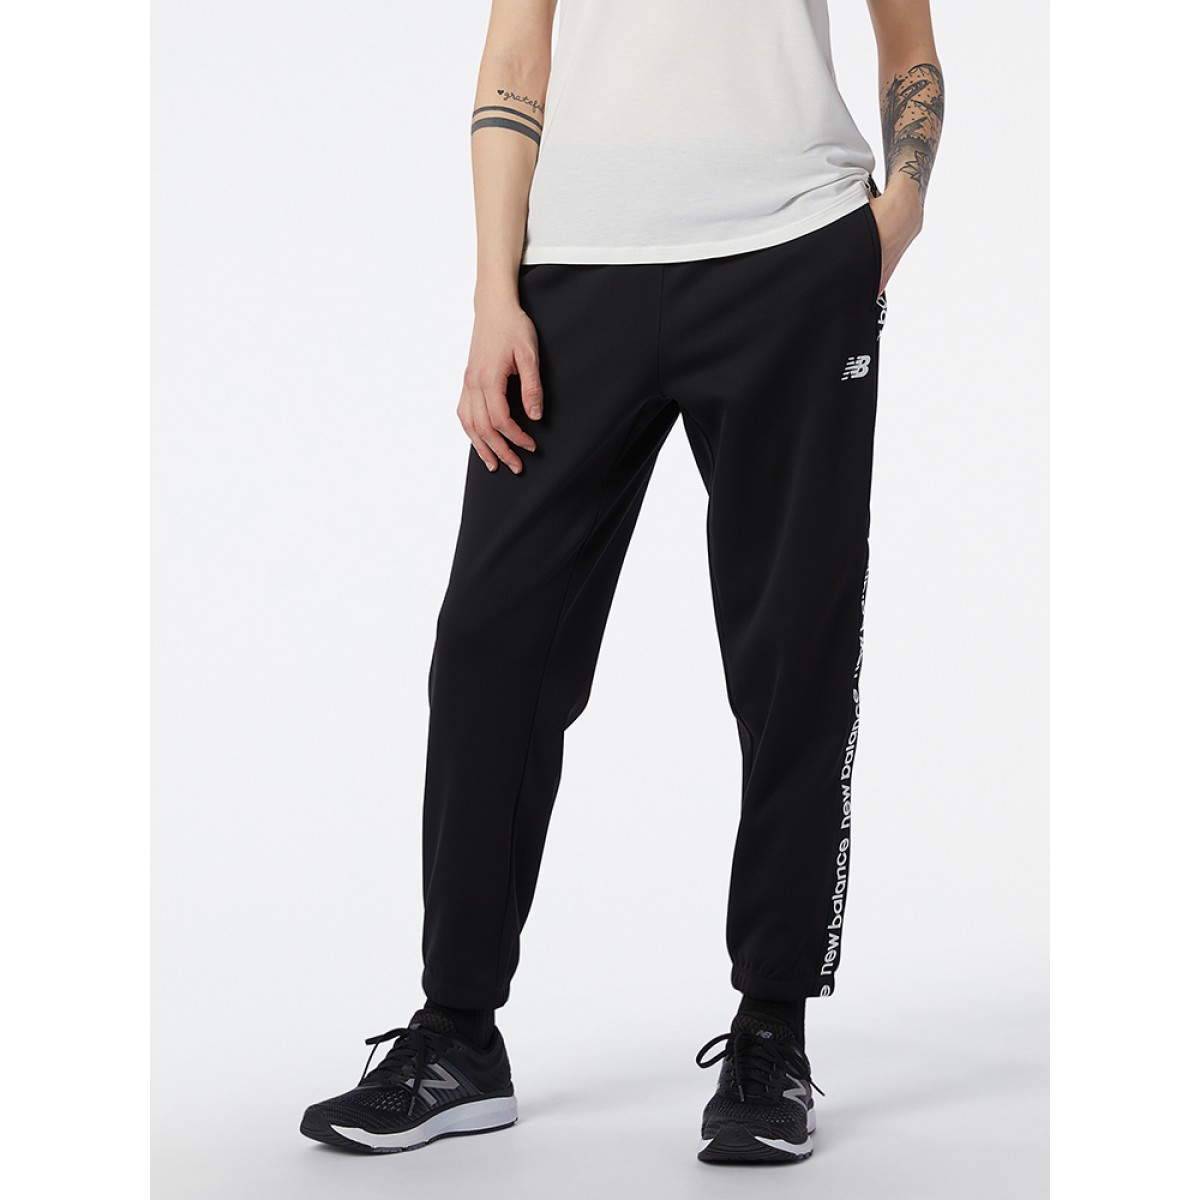 New Balance Defender Pant from Wave One Sports.